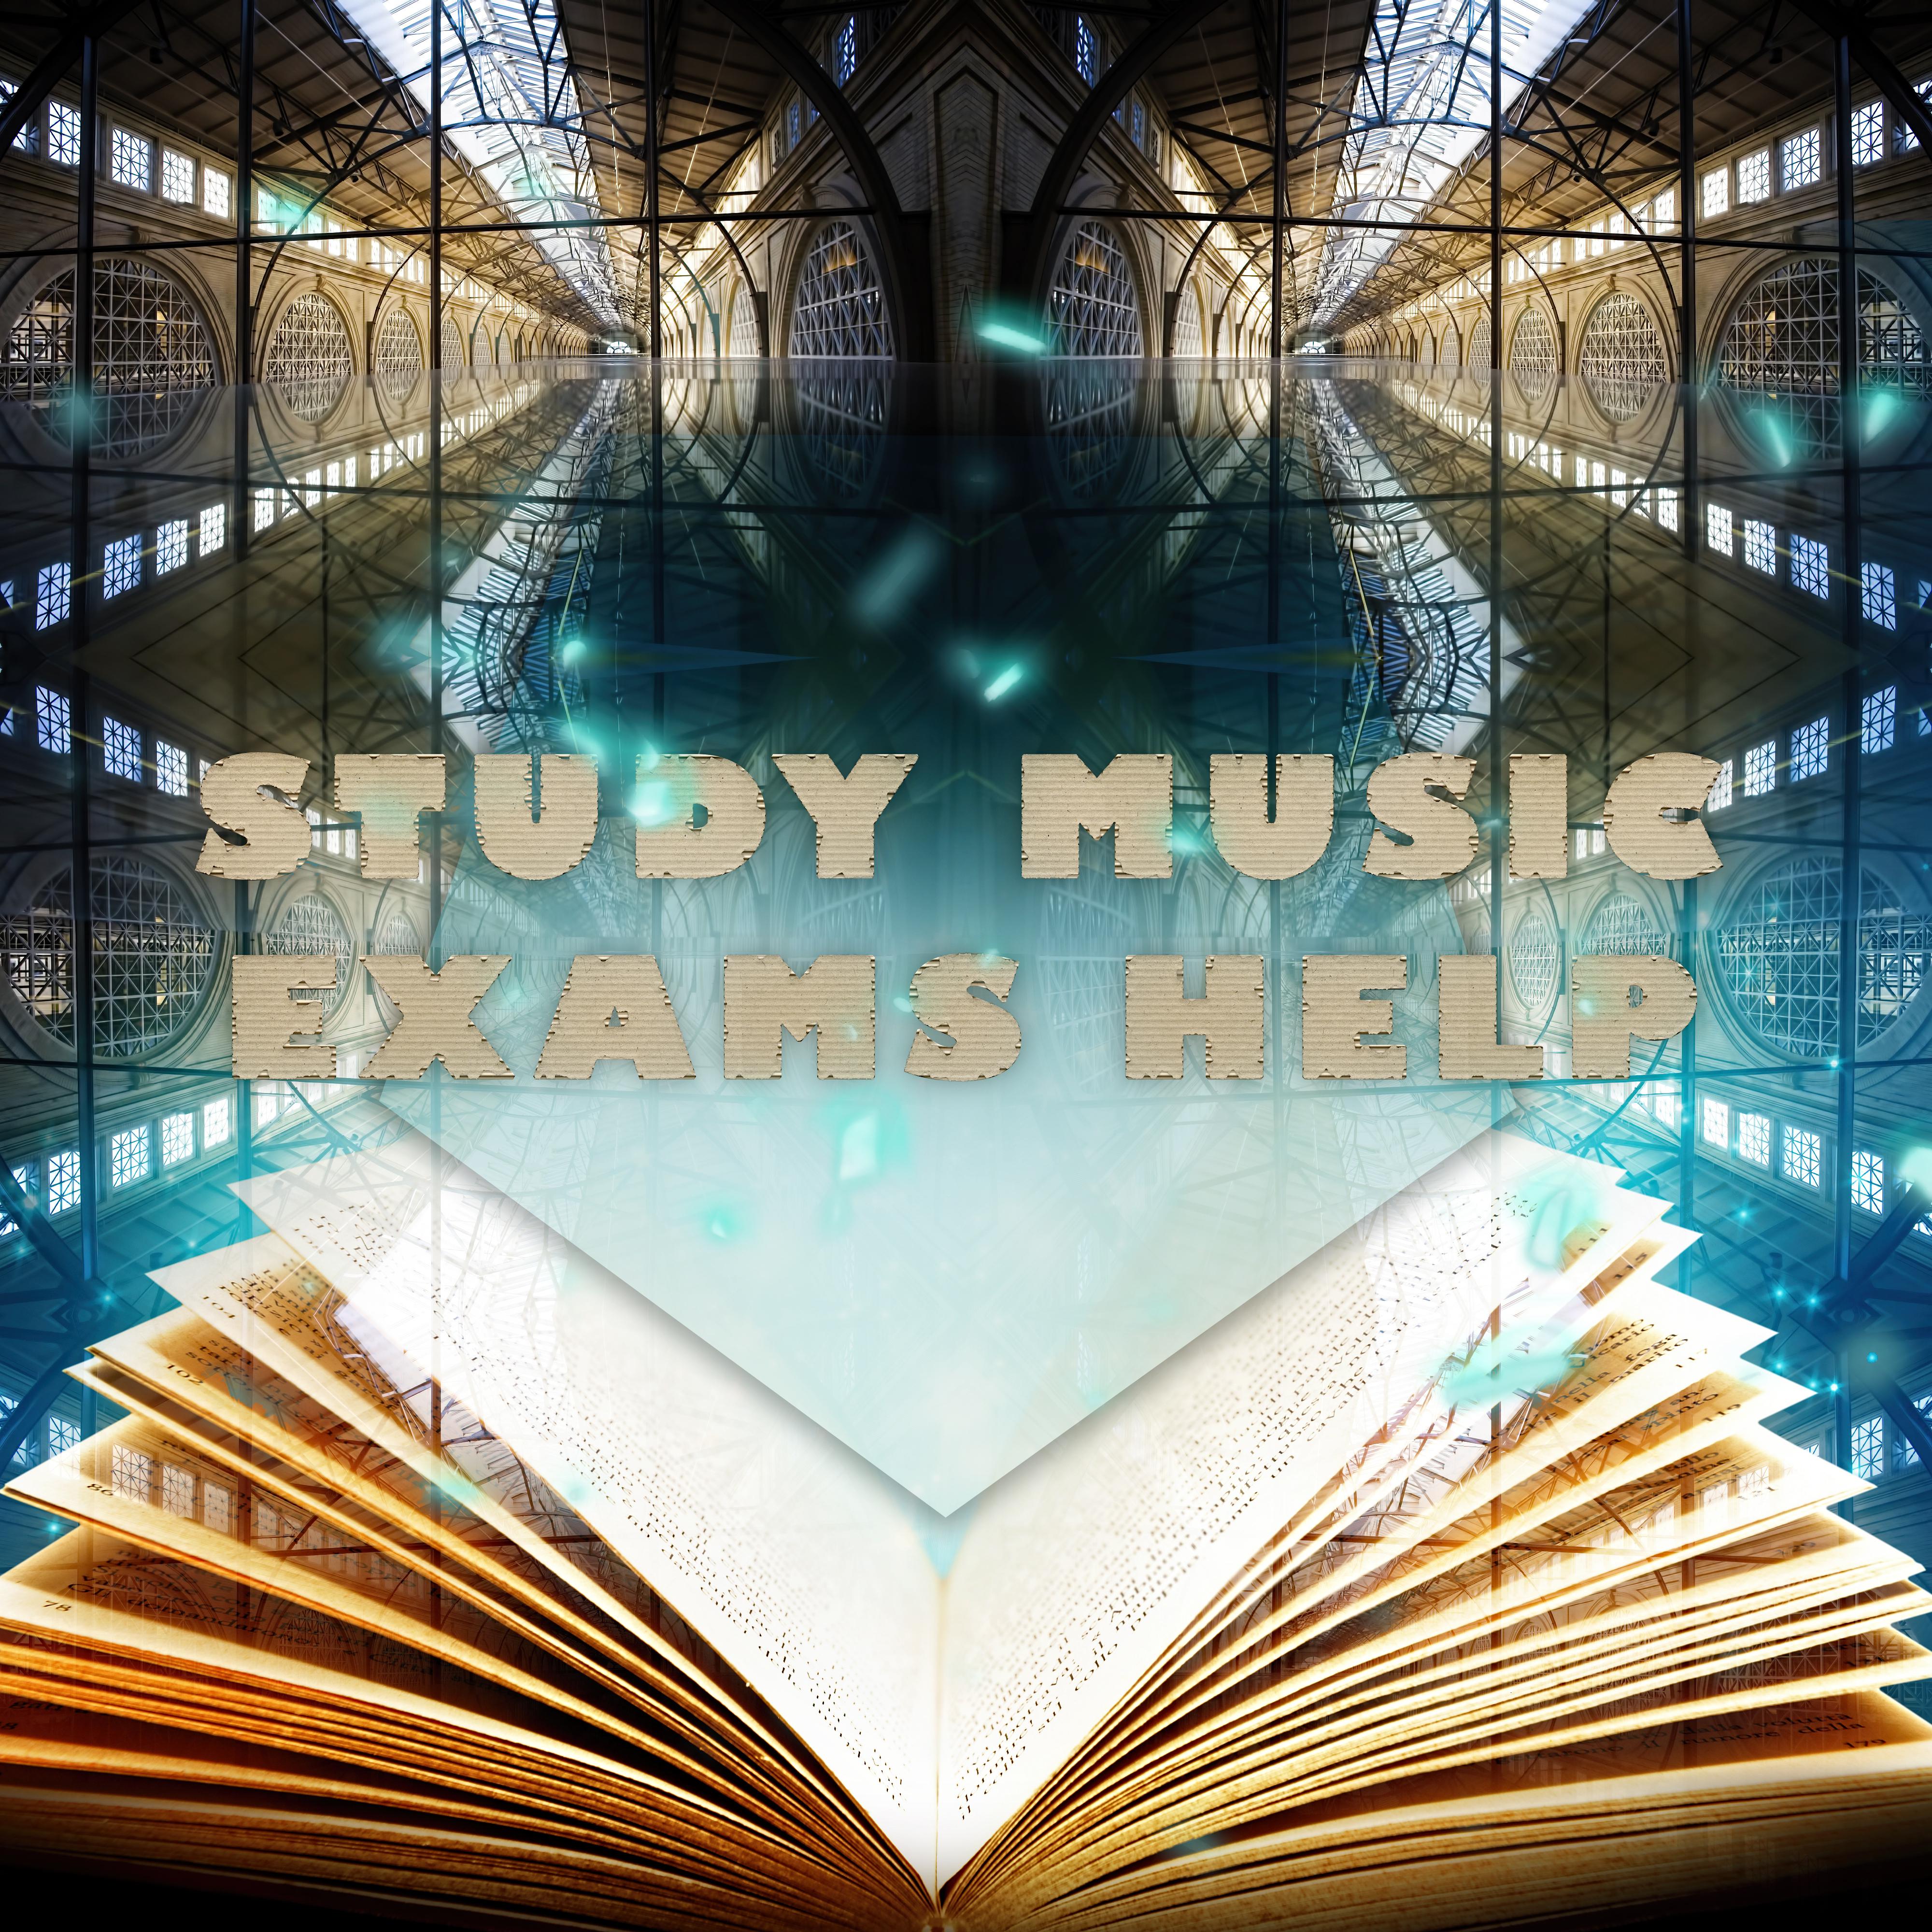 Study Music Exams Help – Concentration Music for Memorizing, Faster Learning & Active Listening, Study Skills with Classics, Classical Music for Mind Power